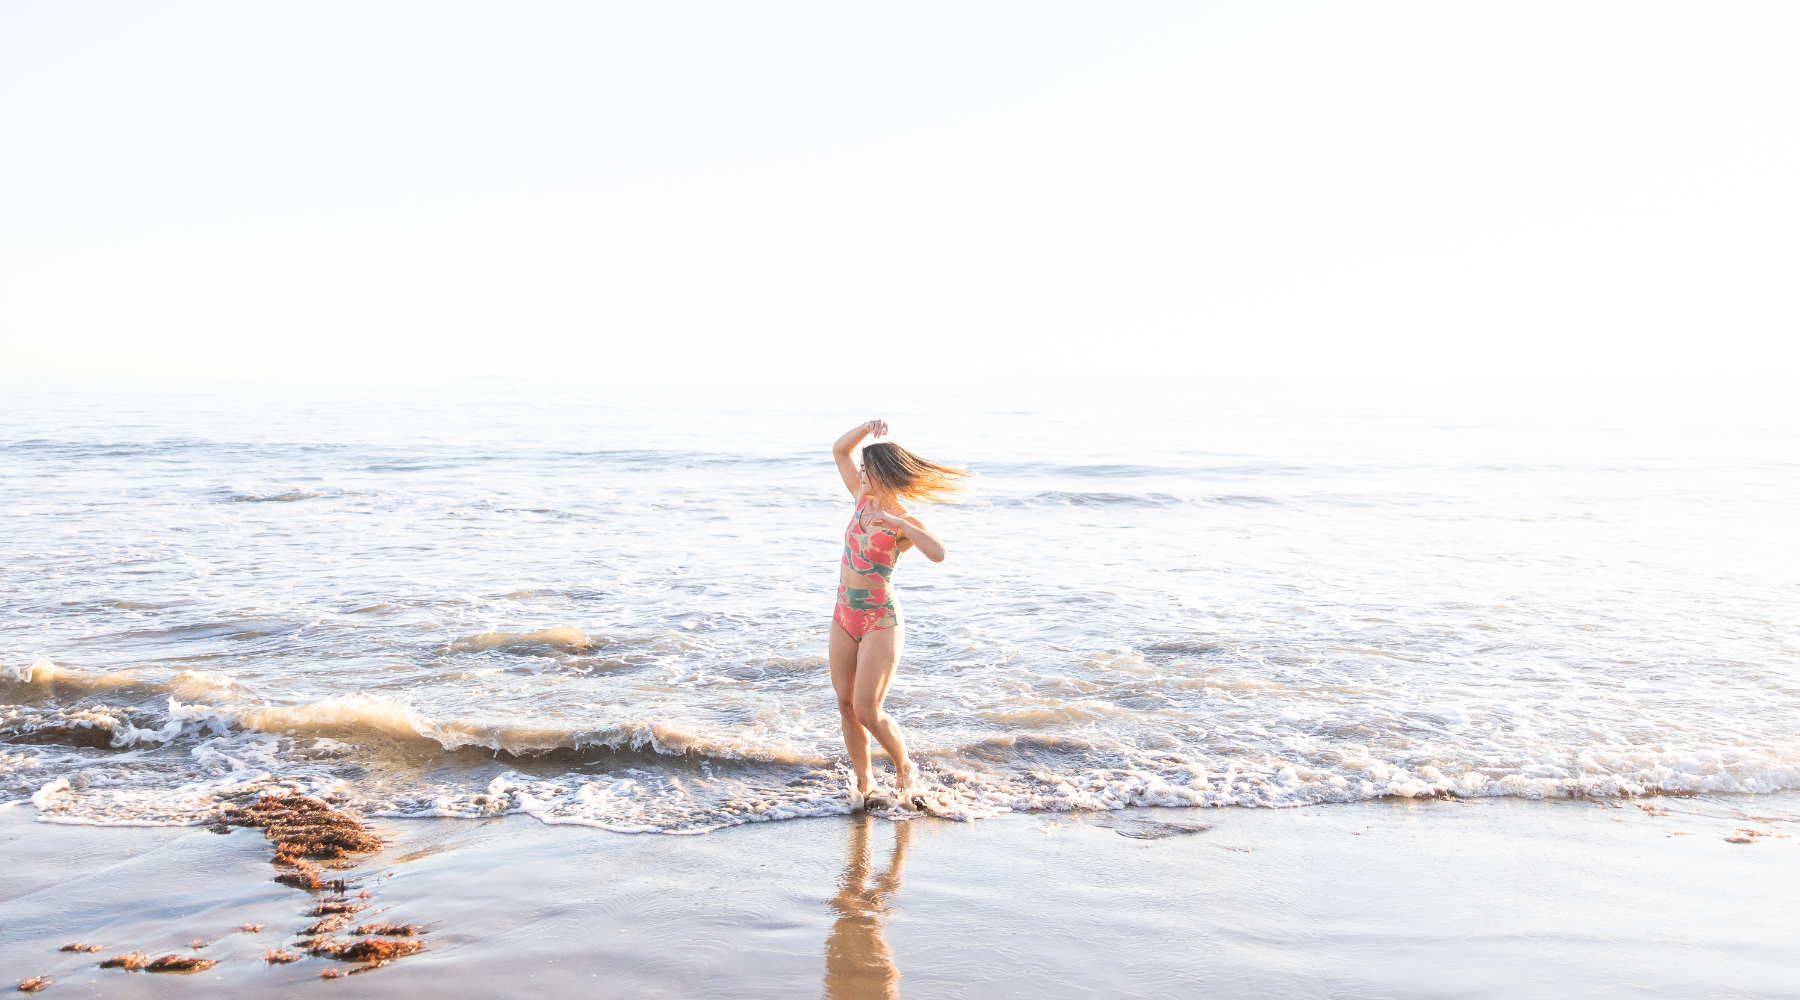 Photo of a woman being carefree and moving around on the beach with the water at her feet.